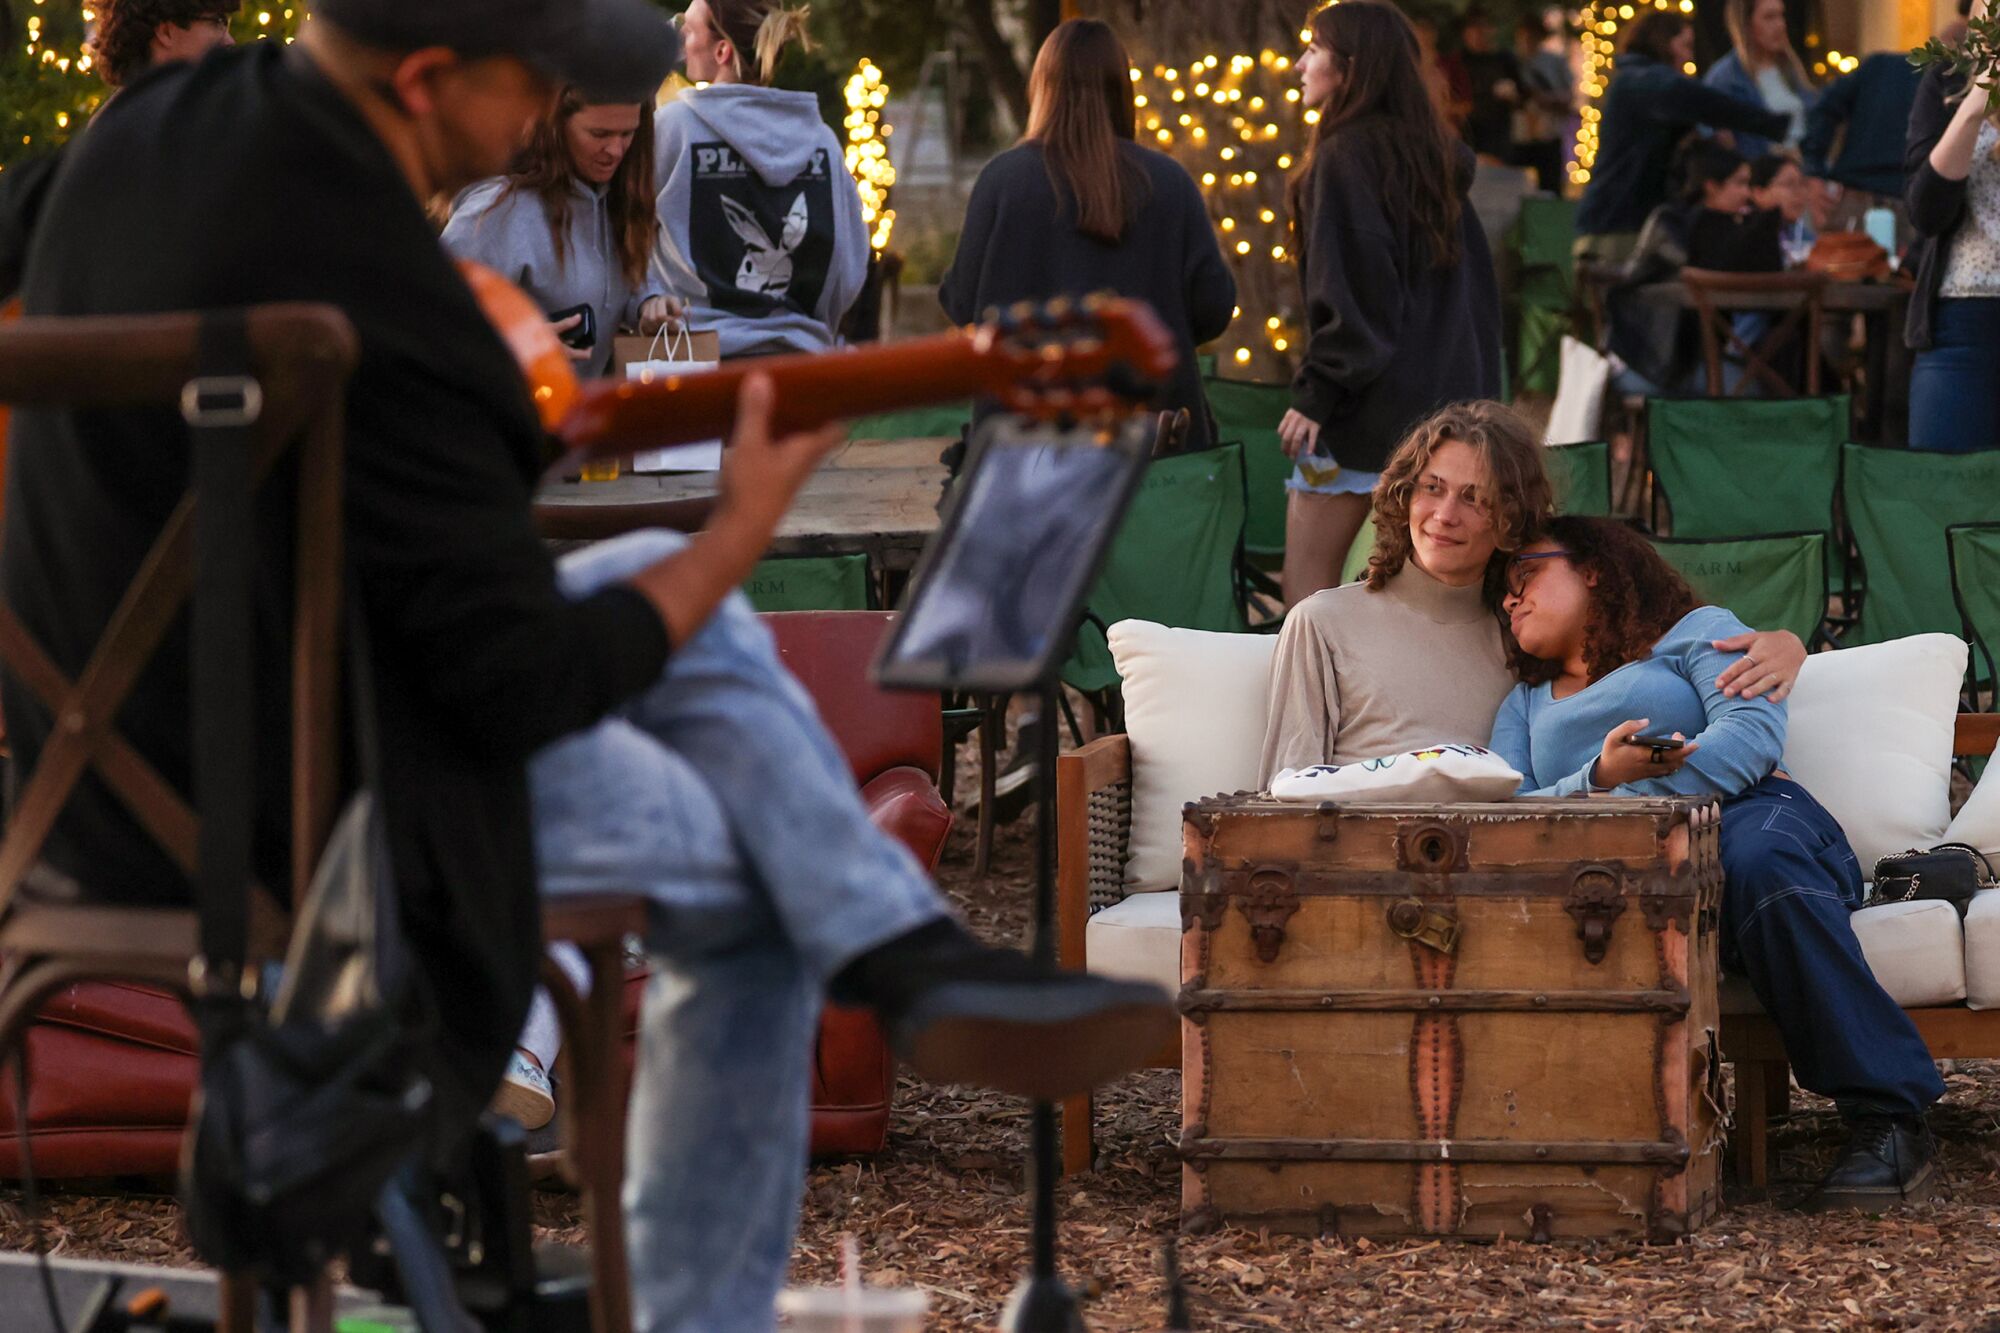 People snuggle on a couch watching a person play the guitar outdoors.